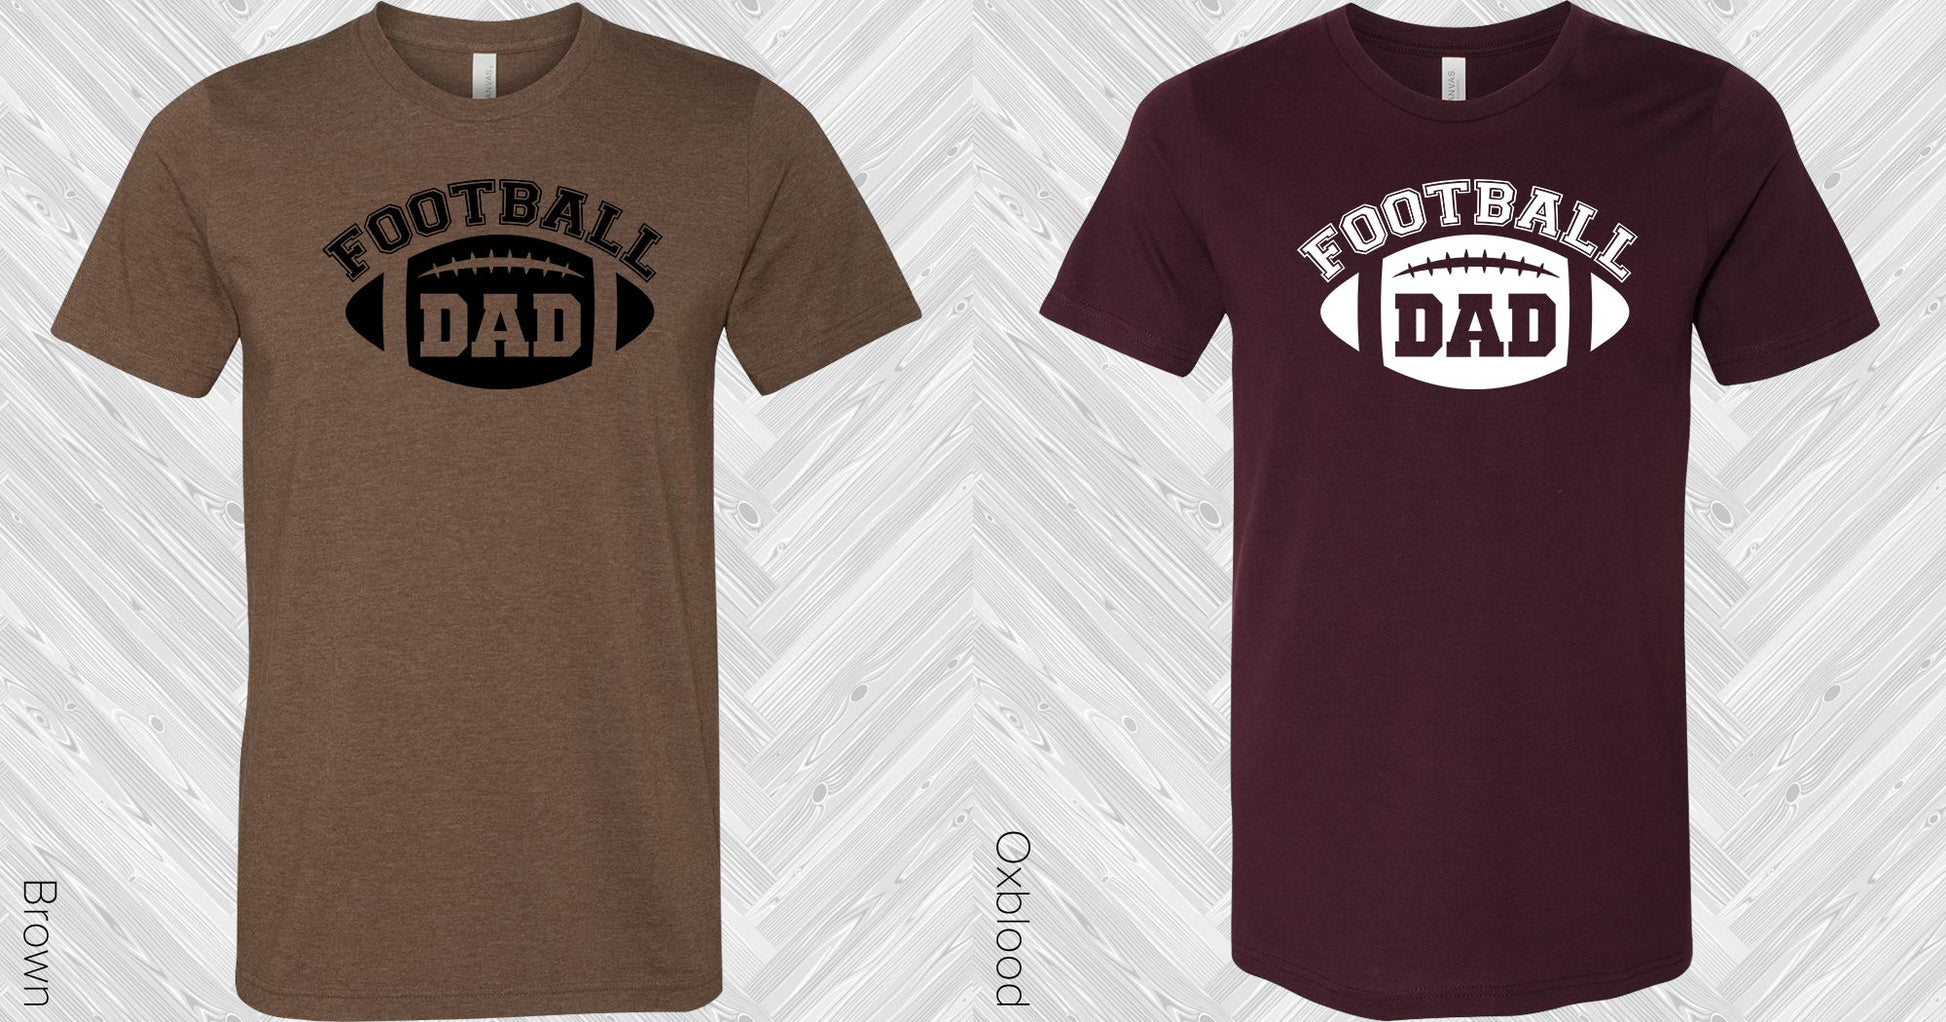 Football Dad Graphic Tee Graphic Tee